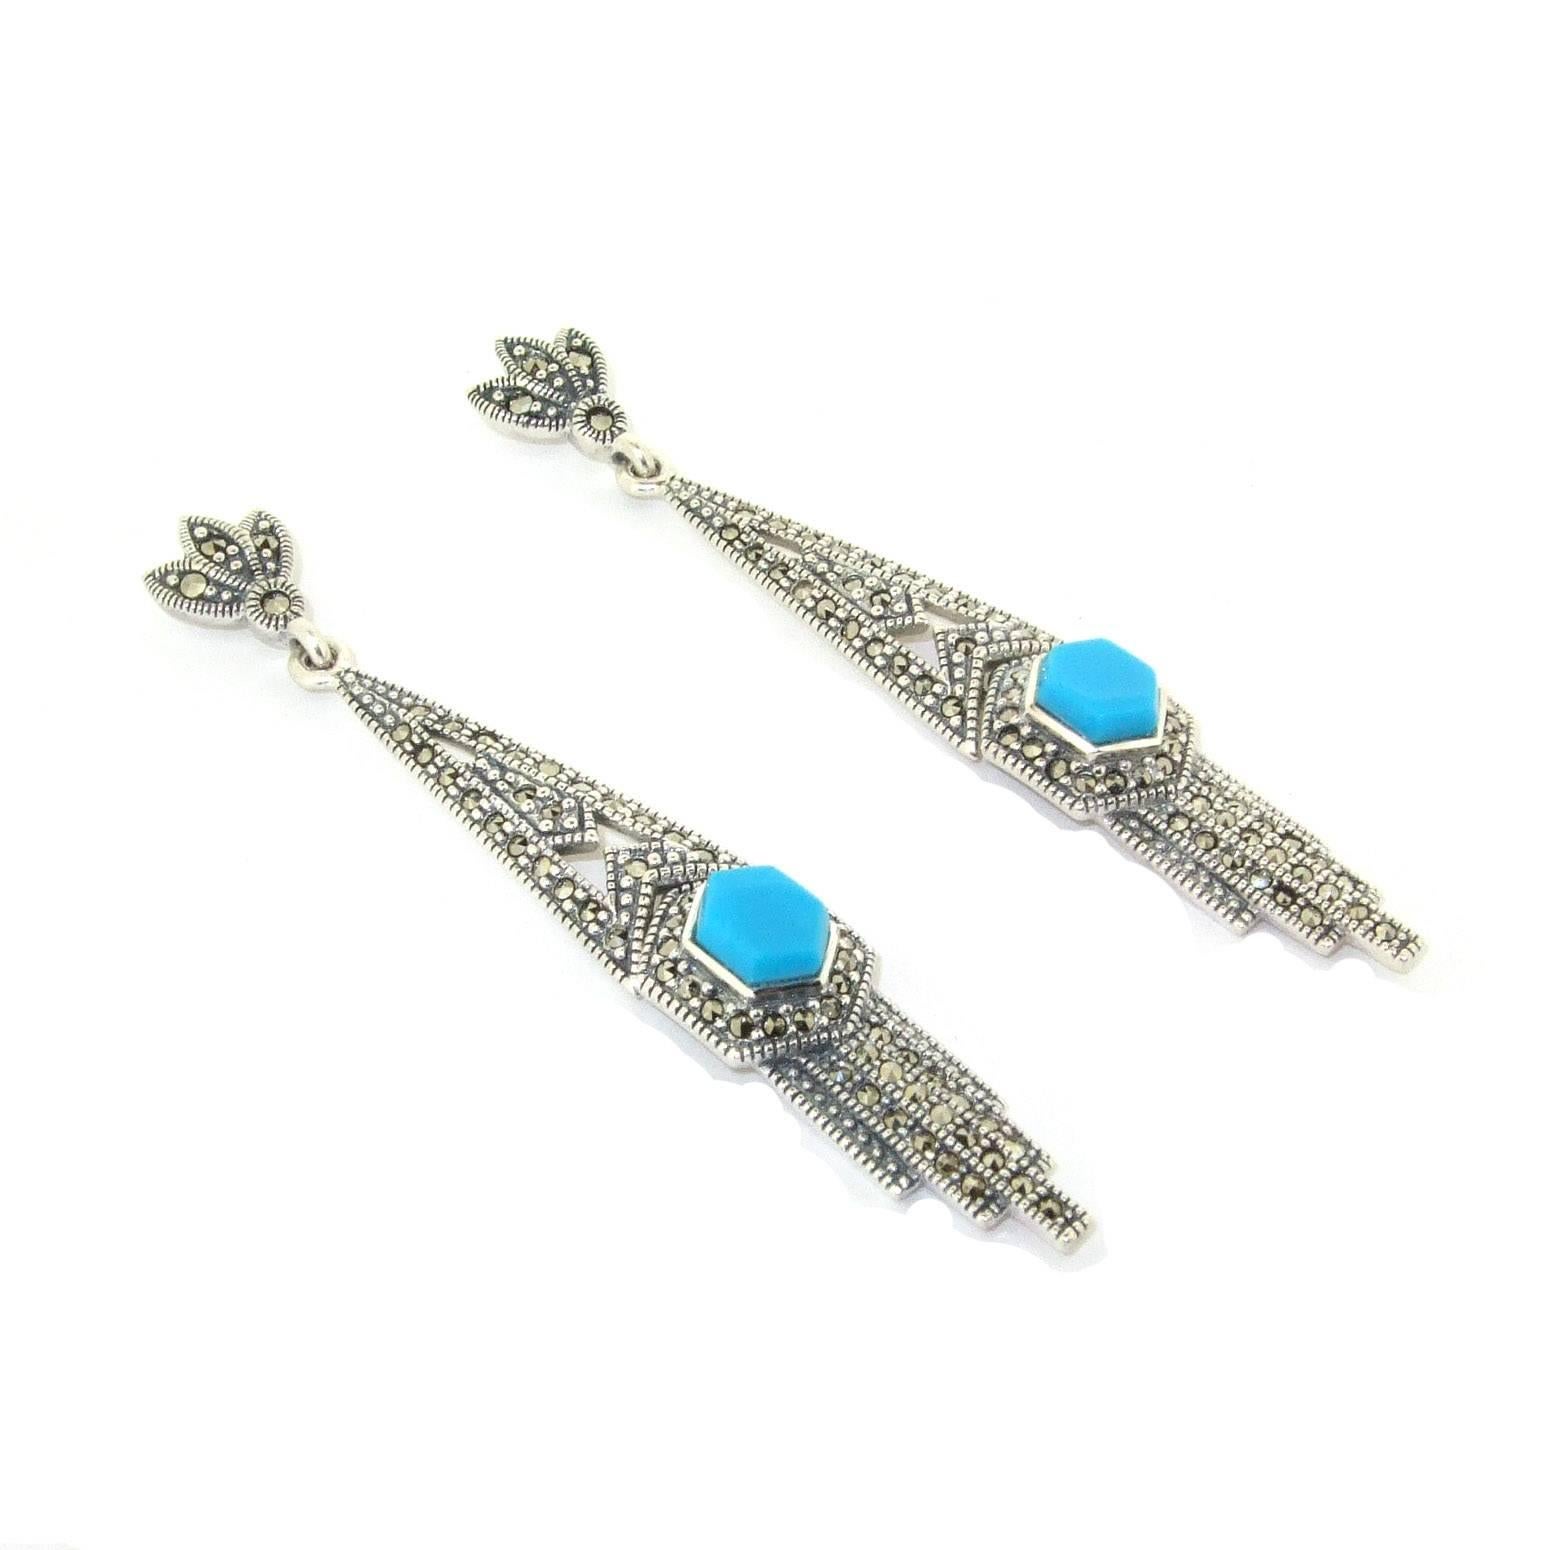 A new pair of sterling silver earrings in Art Deco style set with blue turquoise stones and decorated with sparkling marcasites. Hallmarked 925. The lower section swings freely from the top section. 

They measure: Length/drop 6.8cm (2 3/4 inches),